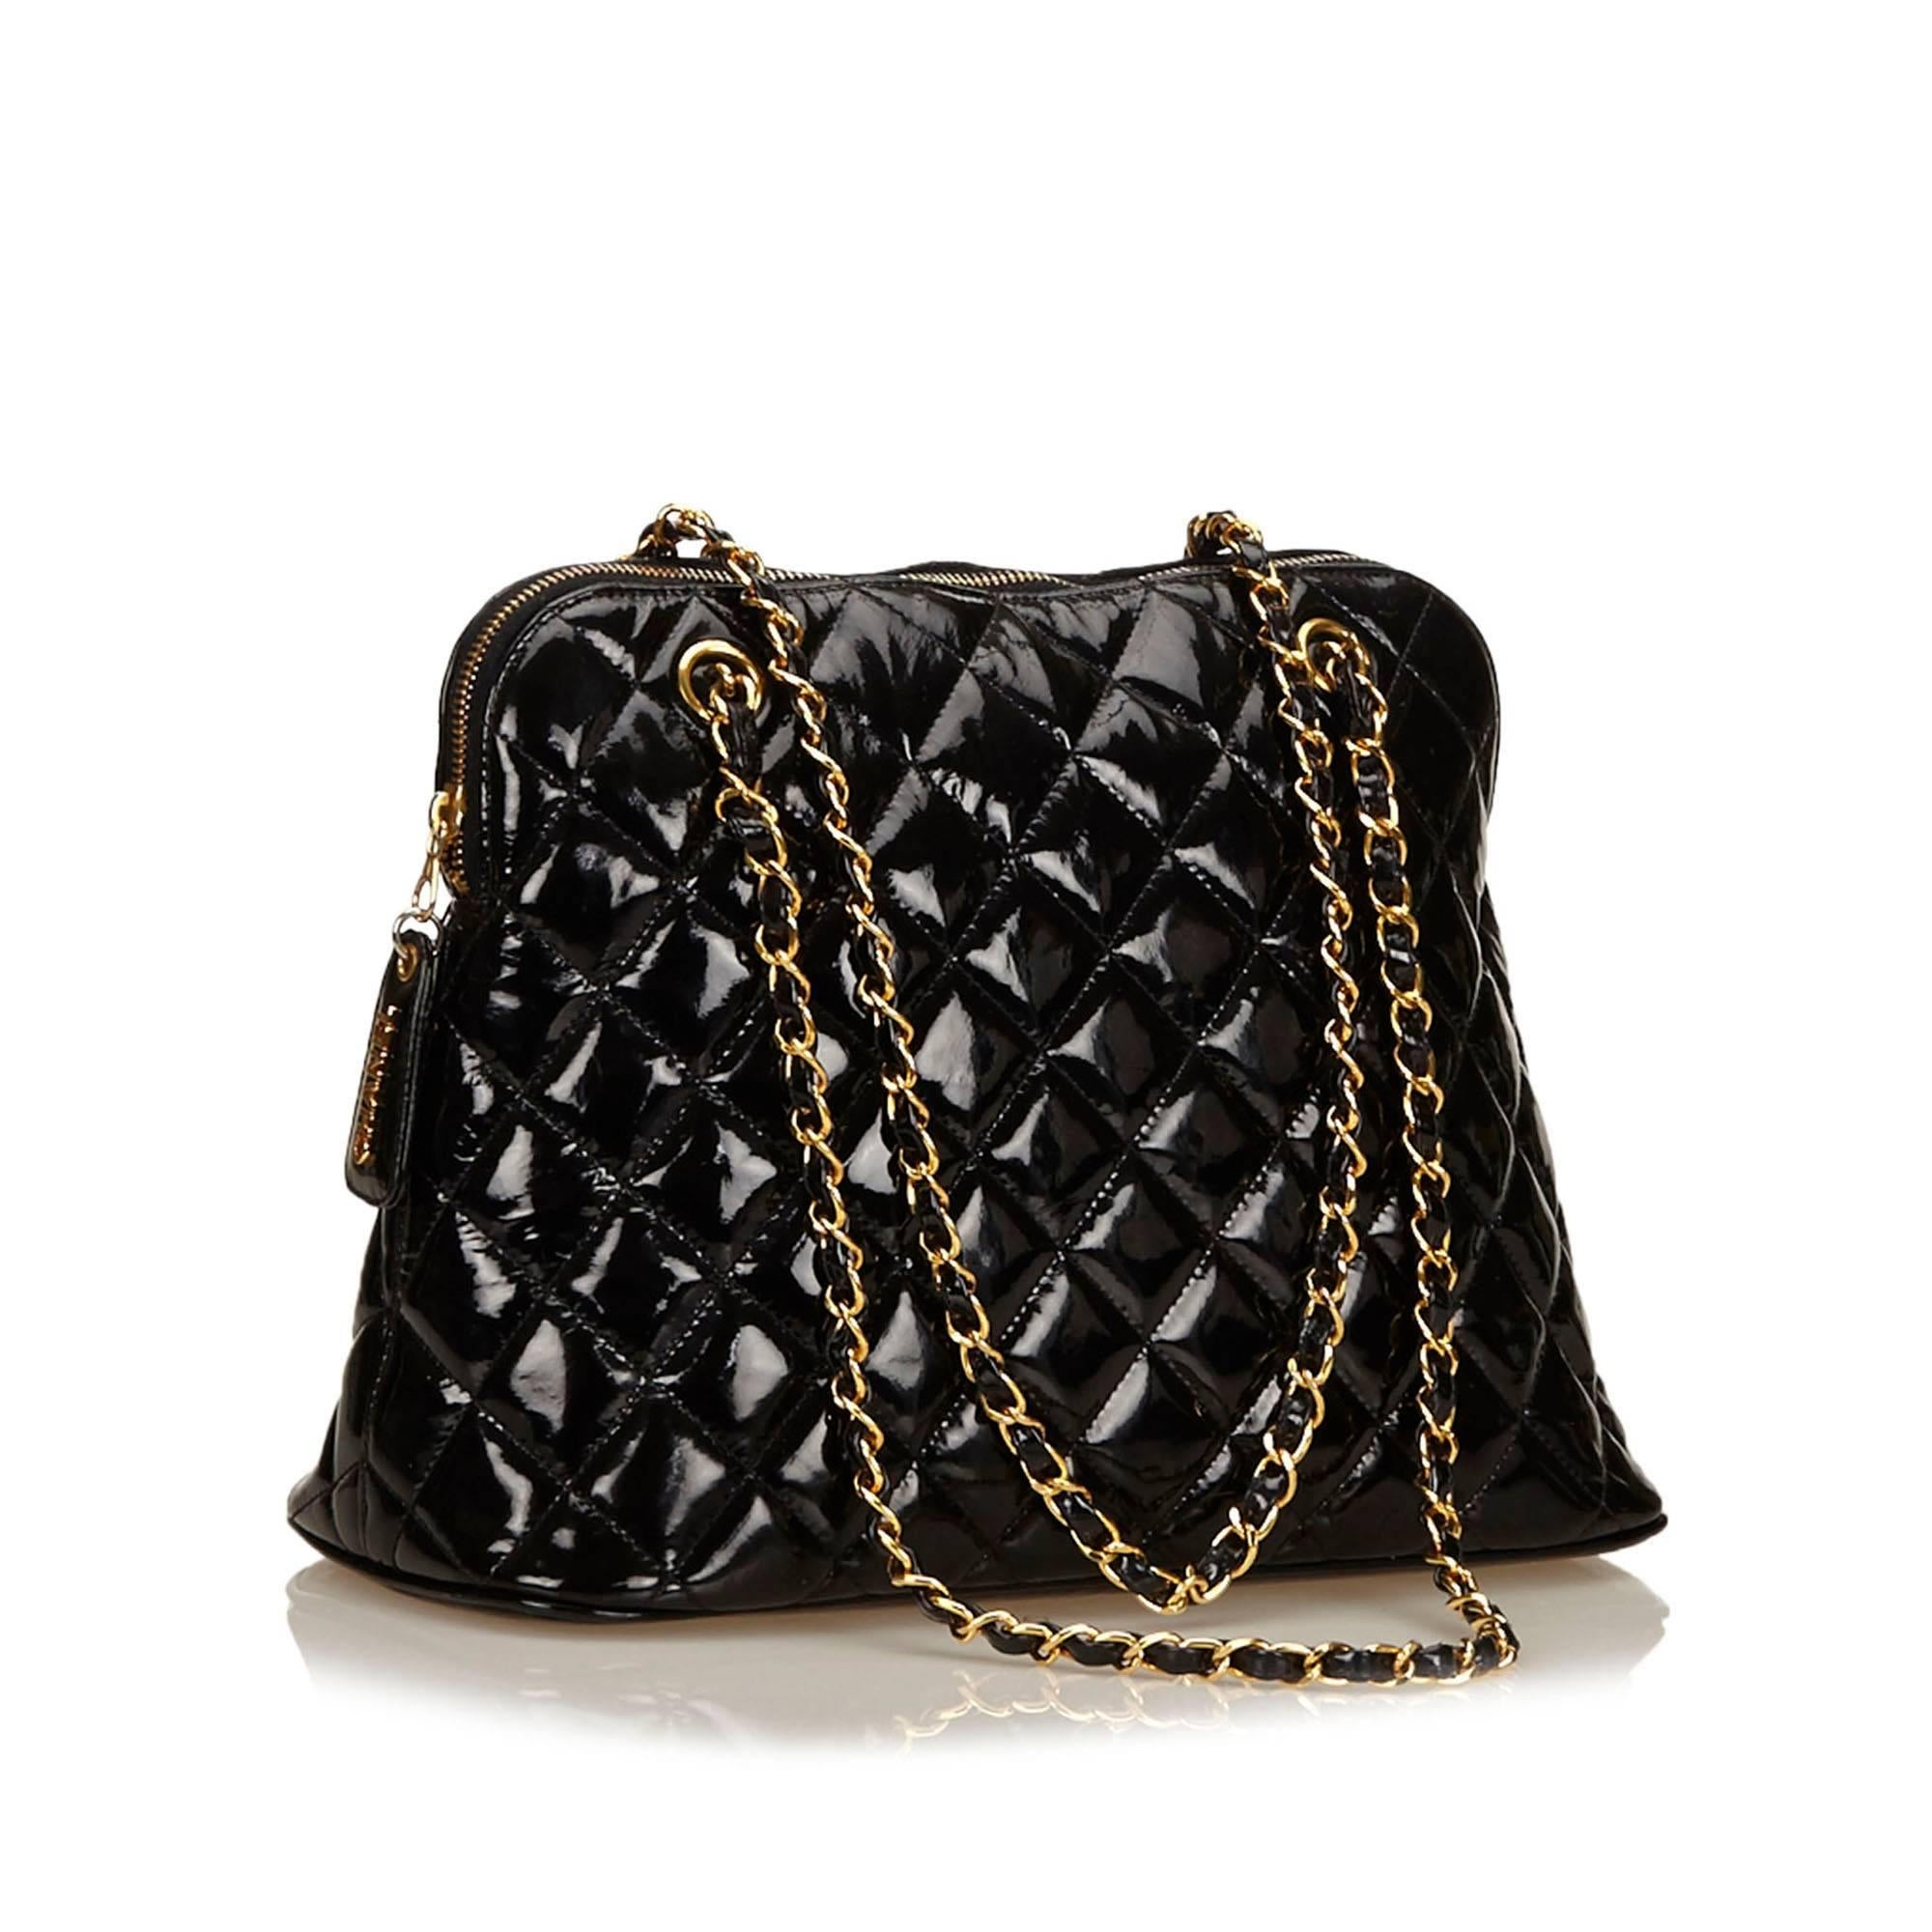 Women's Black Chanel Quilted Patent Leather Bag